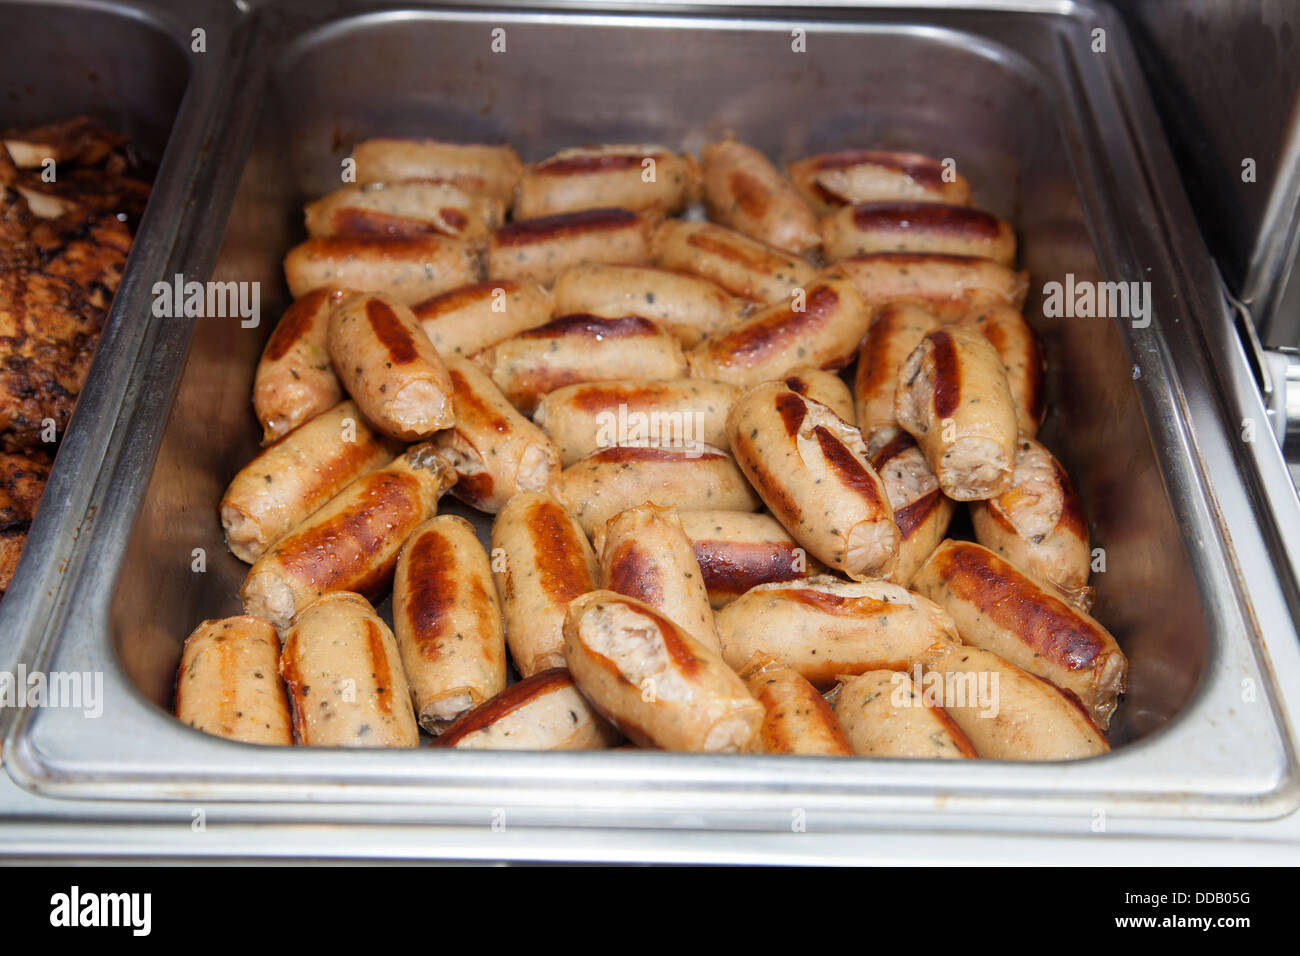 Cooked animal meat products beef cow pork chicken pieces slice portions on diplay Stock Photo